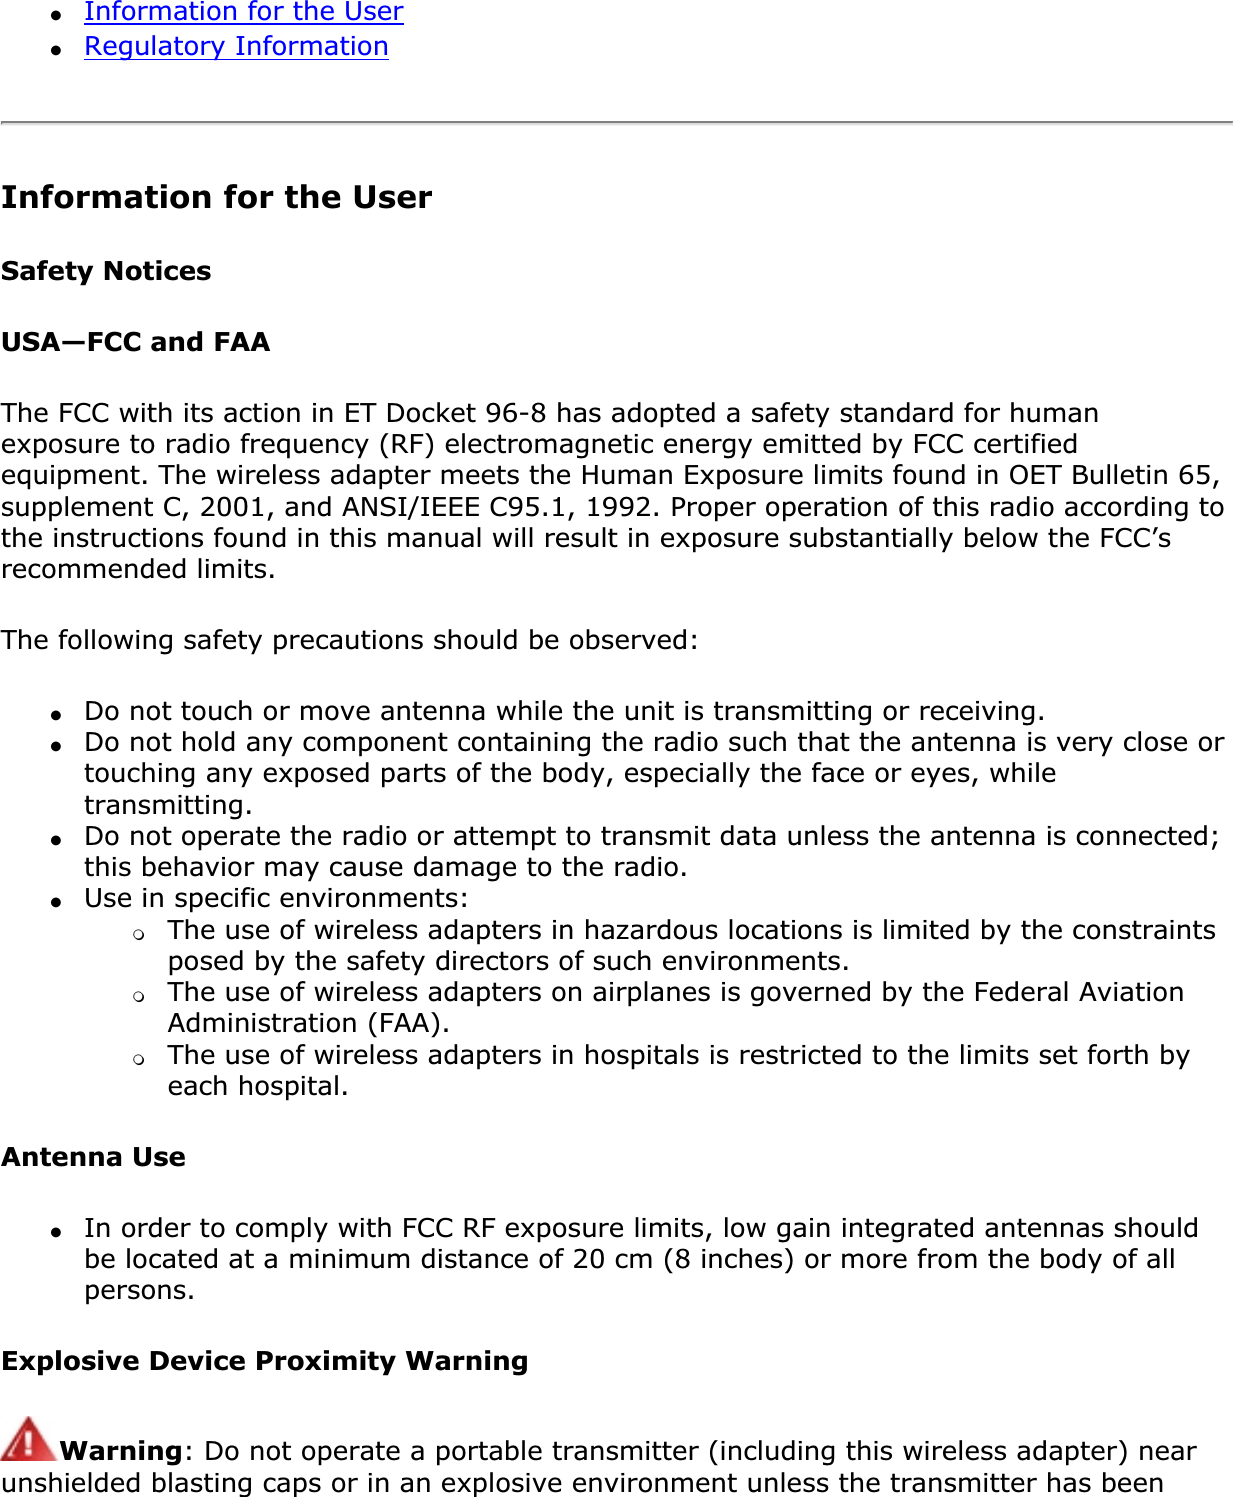 ●Information for the User●Regulatory InformationInformation for the UserSafety NoticesUSA—FCC and FAAThe FCC with its action in ET Docket 96-8 has adopted a safety standard for human exposure to radio frequency (RF) electromagnetic energy emitted by FCC certified equipment. The wireless adapter meets the Human Exposure limits found in OET Bulletin 65, supplement C, 2001, and ANSI/IEEE C95.1, 1992. Proper operation of this radio according to the instructions found in this manual will result in exposure substantially below the FCC’s recommended limits.The following safety precautions should be observed:●Do not touch or move antenna while the unit is transmitting or receiving.●Do not hold any component containing the radio such that the antenna is very close or touching any exposed parts of the body, especially the face or eyes, while transmitting.●Do not operate the radio or attempt to transmit data unless the antenna is connected; this behavior may cause damage to the radio.●Use in specific environments: ❍The use of wireless adapters in hazardous locations is limited by the constraints posed by the safety directors of such environments.❍The use of wireless adapters on airplanes is governed by the Federal Aviation Administration (FAA).❍The use of wireless adapters in hospitals is restricted to the limits set forth by each hospital.Antenna Use●In order to comply with FCC RF exposure limits, low gain integrated antennas should be located at a minimum distance of 20 cm (8 inches) or more from the body of all persons.Explosive Device Proximity WarningWarning: Do not operate a portable transmitter (including this wireless adapter) near unshielded blasting caps or in an explosive environment unless the transmitter has been 